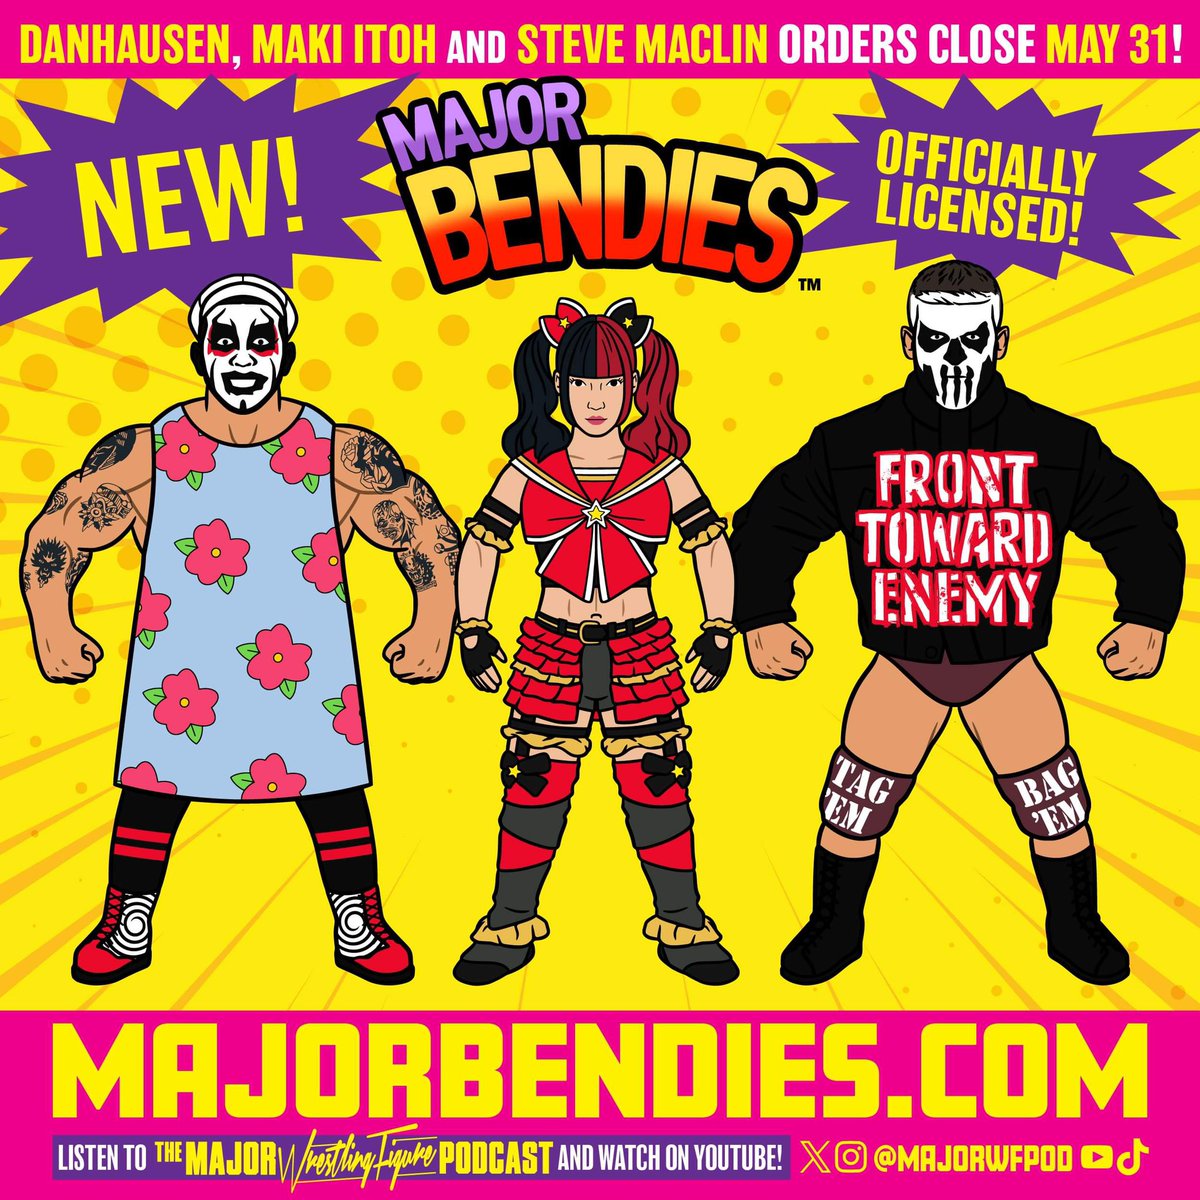 Only a few days left to get your pre-orders in! What gets ordered is all that gets made so if you want any of these #MajorBendies, you have to get them at MajorBendies.com before this month ends! @DanhausenAD @maki_itoh @SteveMaclin #ScratchThatFigureItch